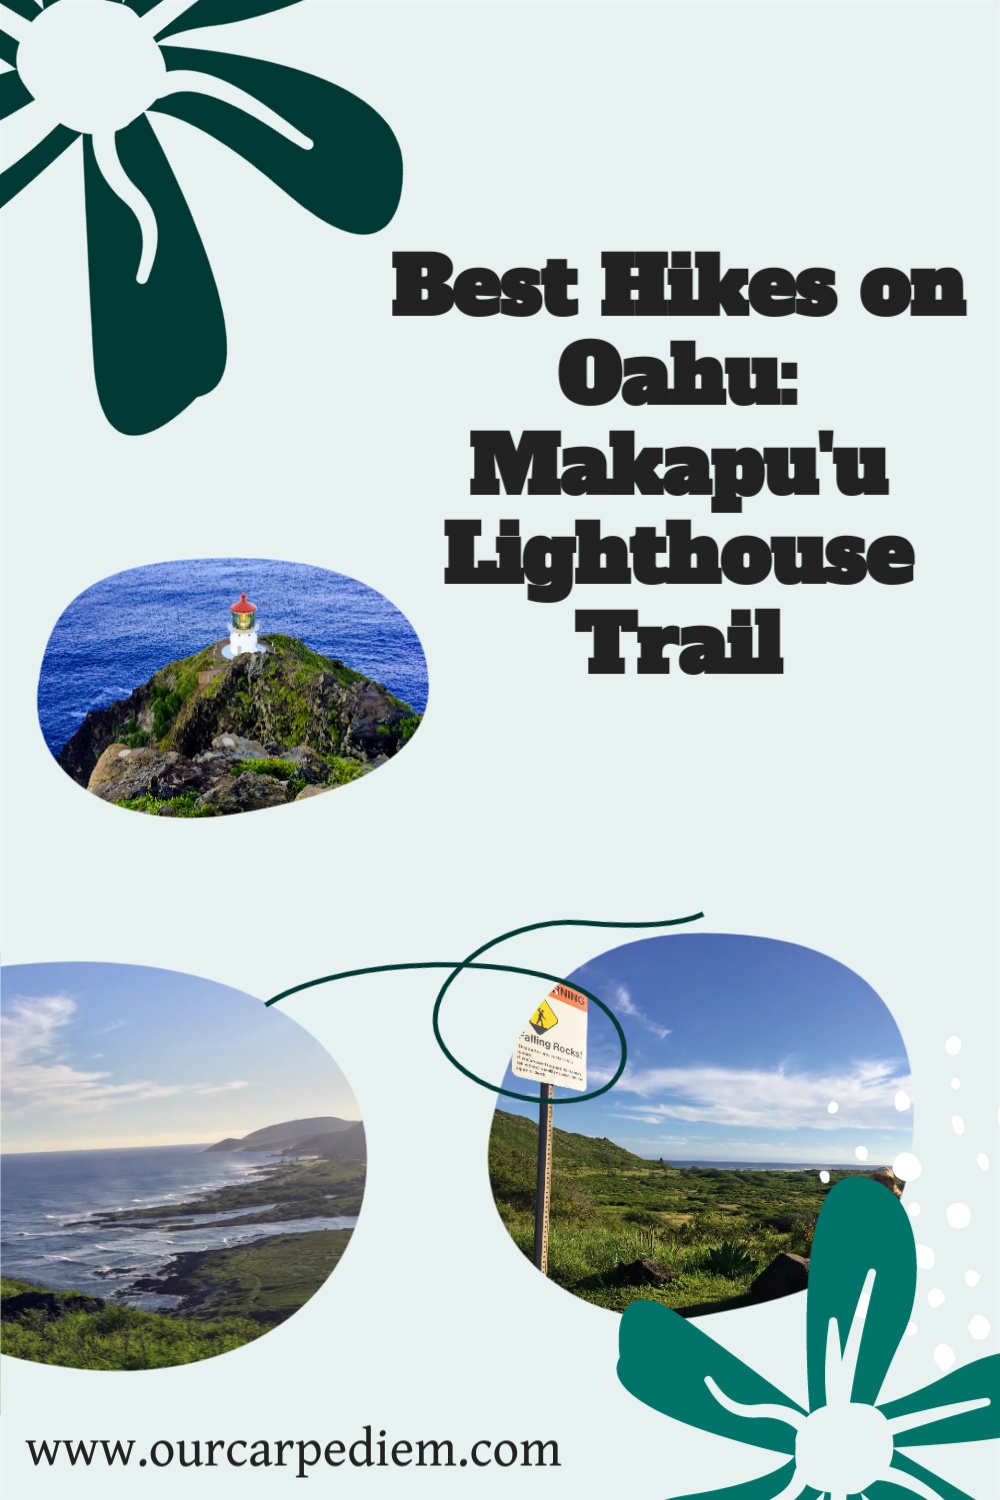 Makapu’u Lighthouse Trail: Strong Focus On Whales and Epic Views